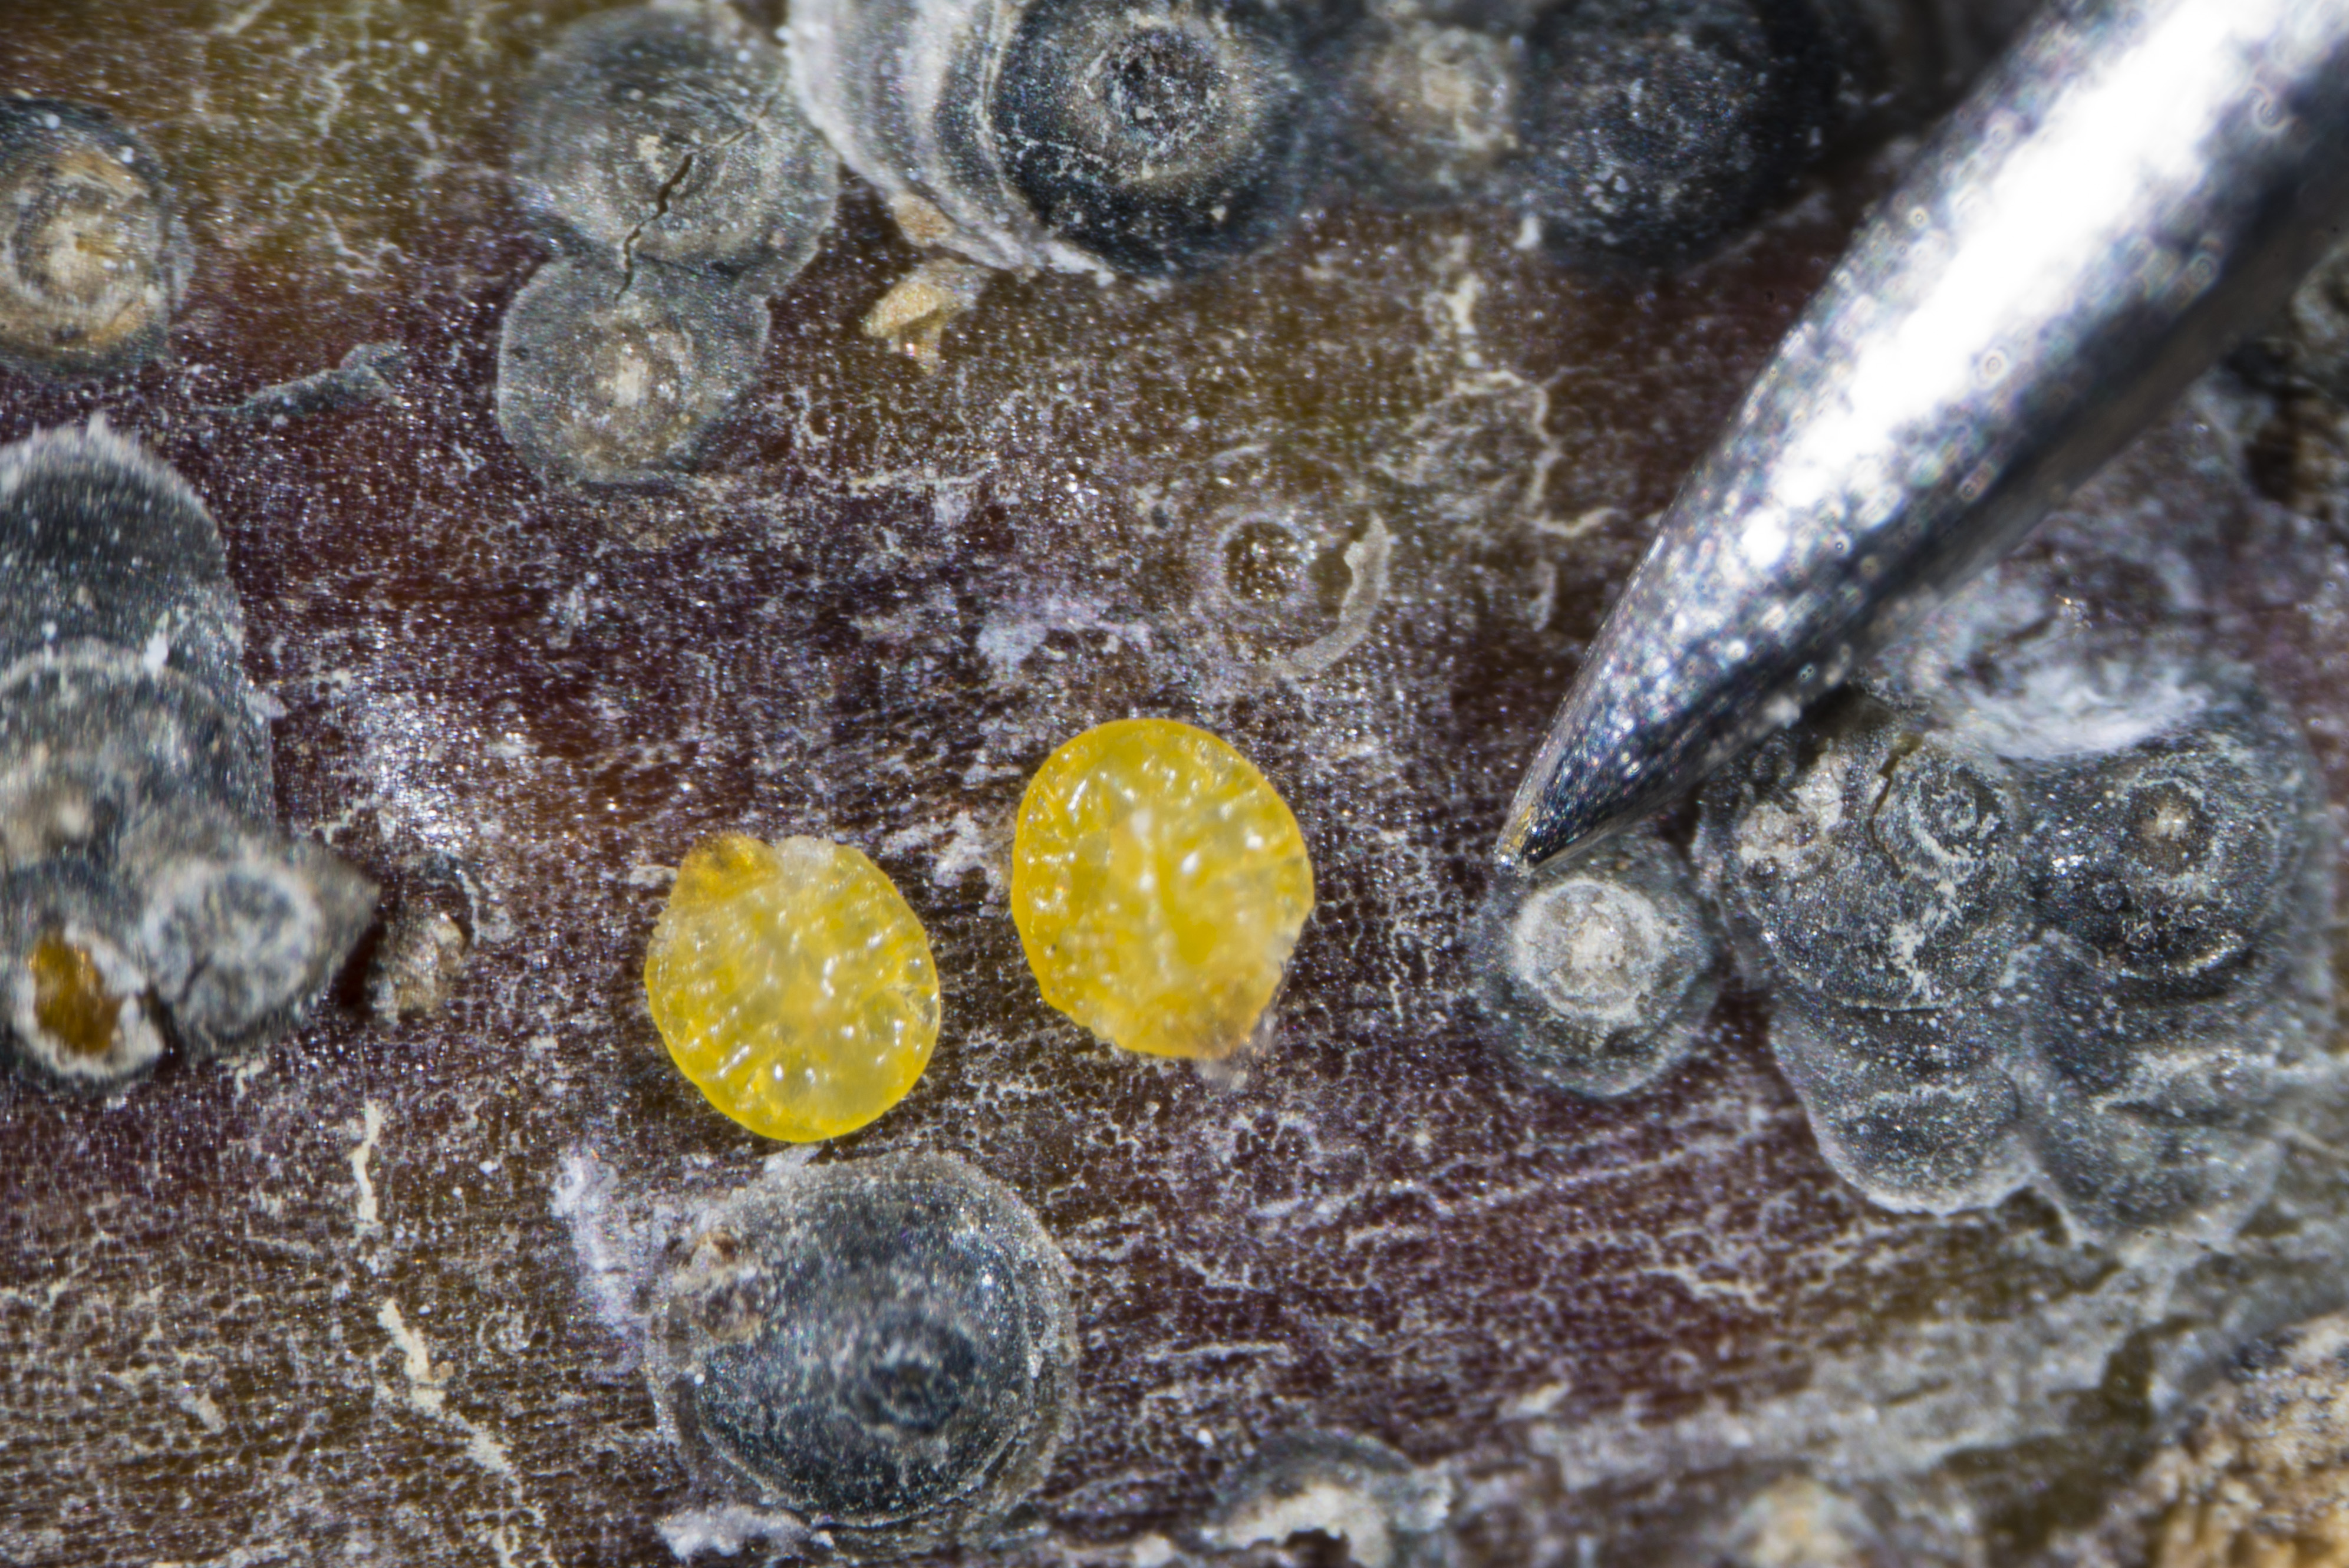 Figure 7. Adult female San Jose scales under protective covering (dark gray) and removed from waxy protective covering (yellow). (<em>Photo credit: John Obermeyer, Purdue Entomology</em>)